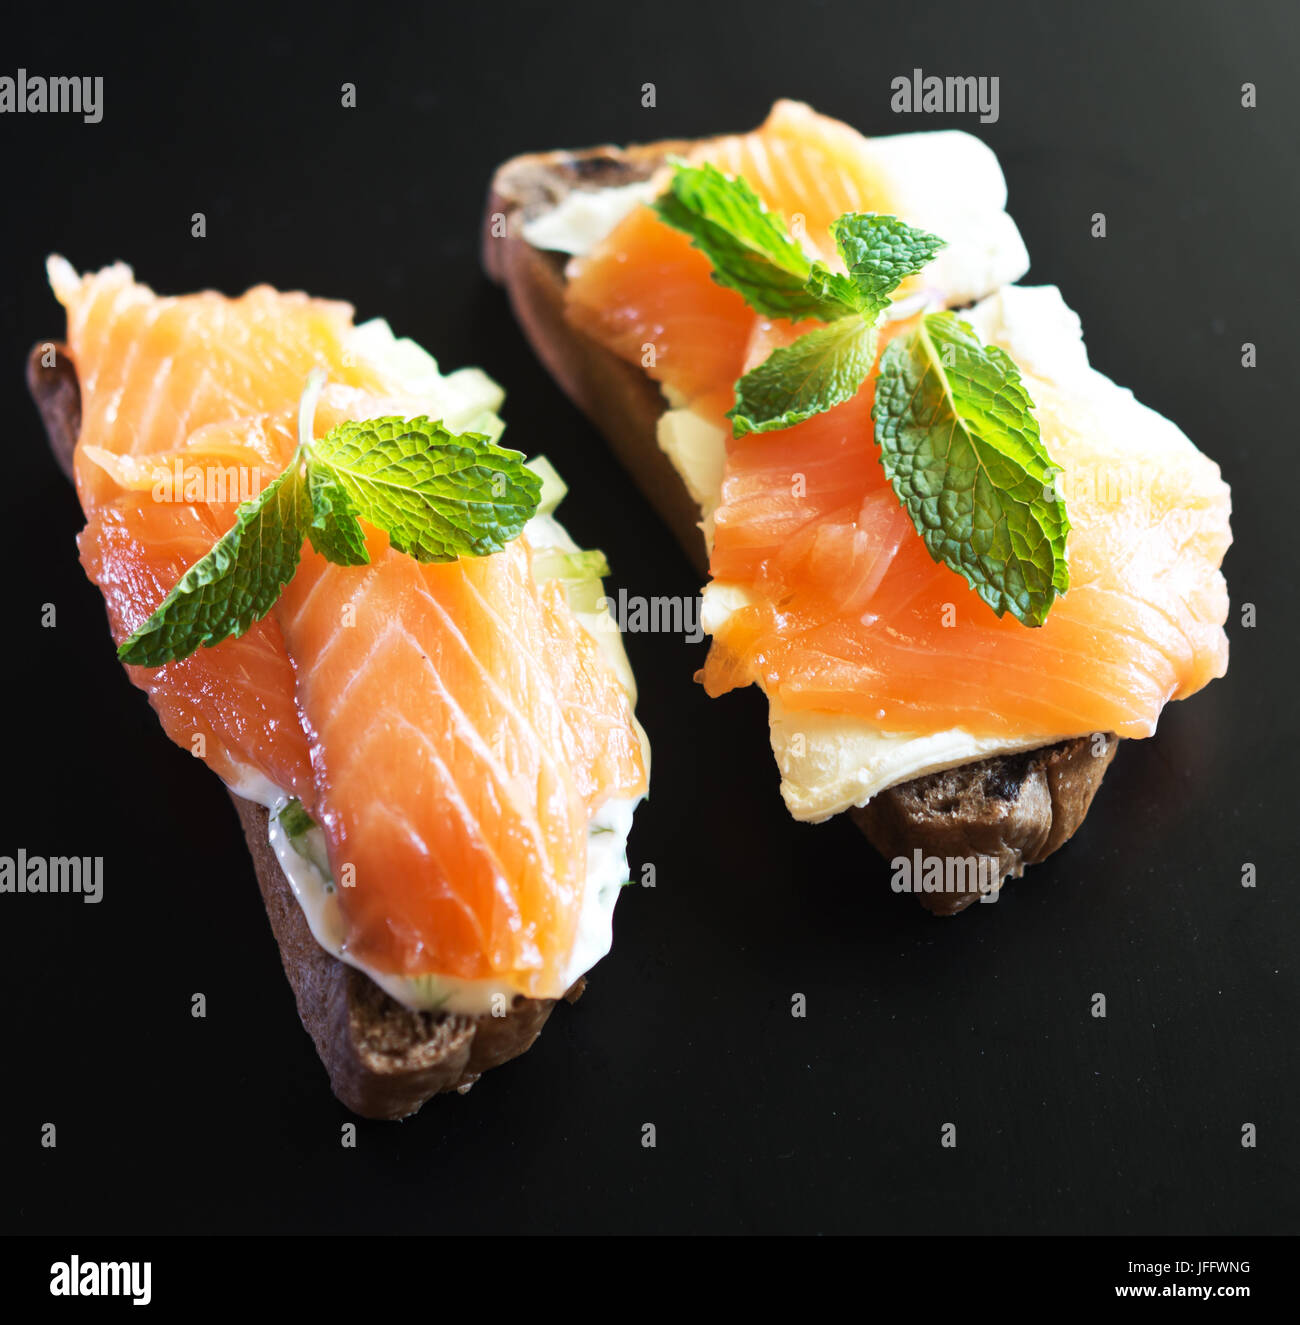 sandwiches with red fish Stock Photo